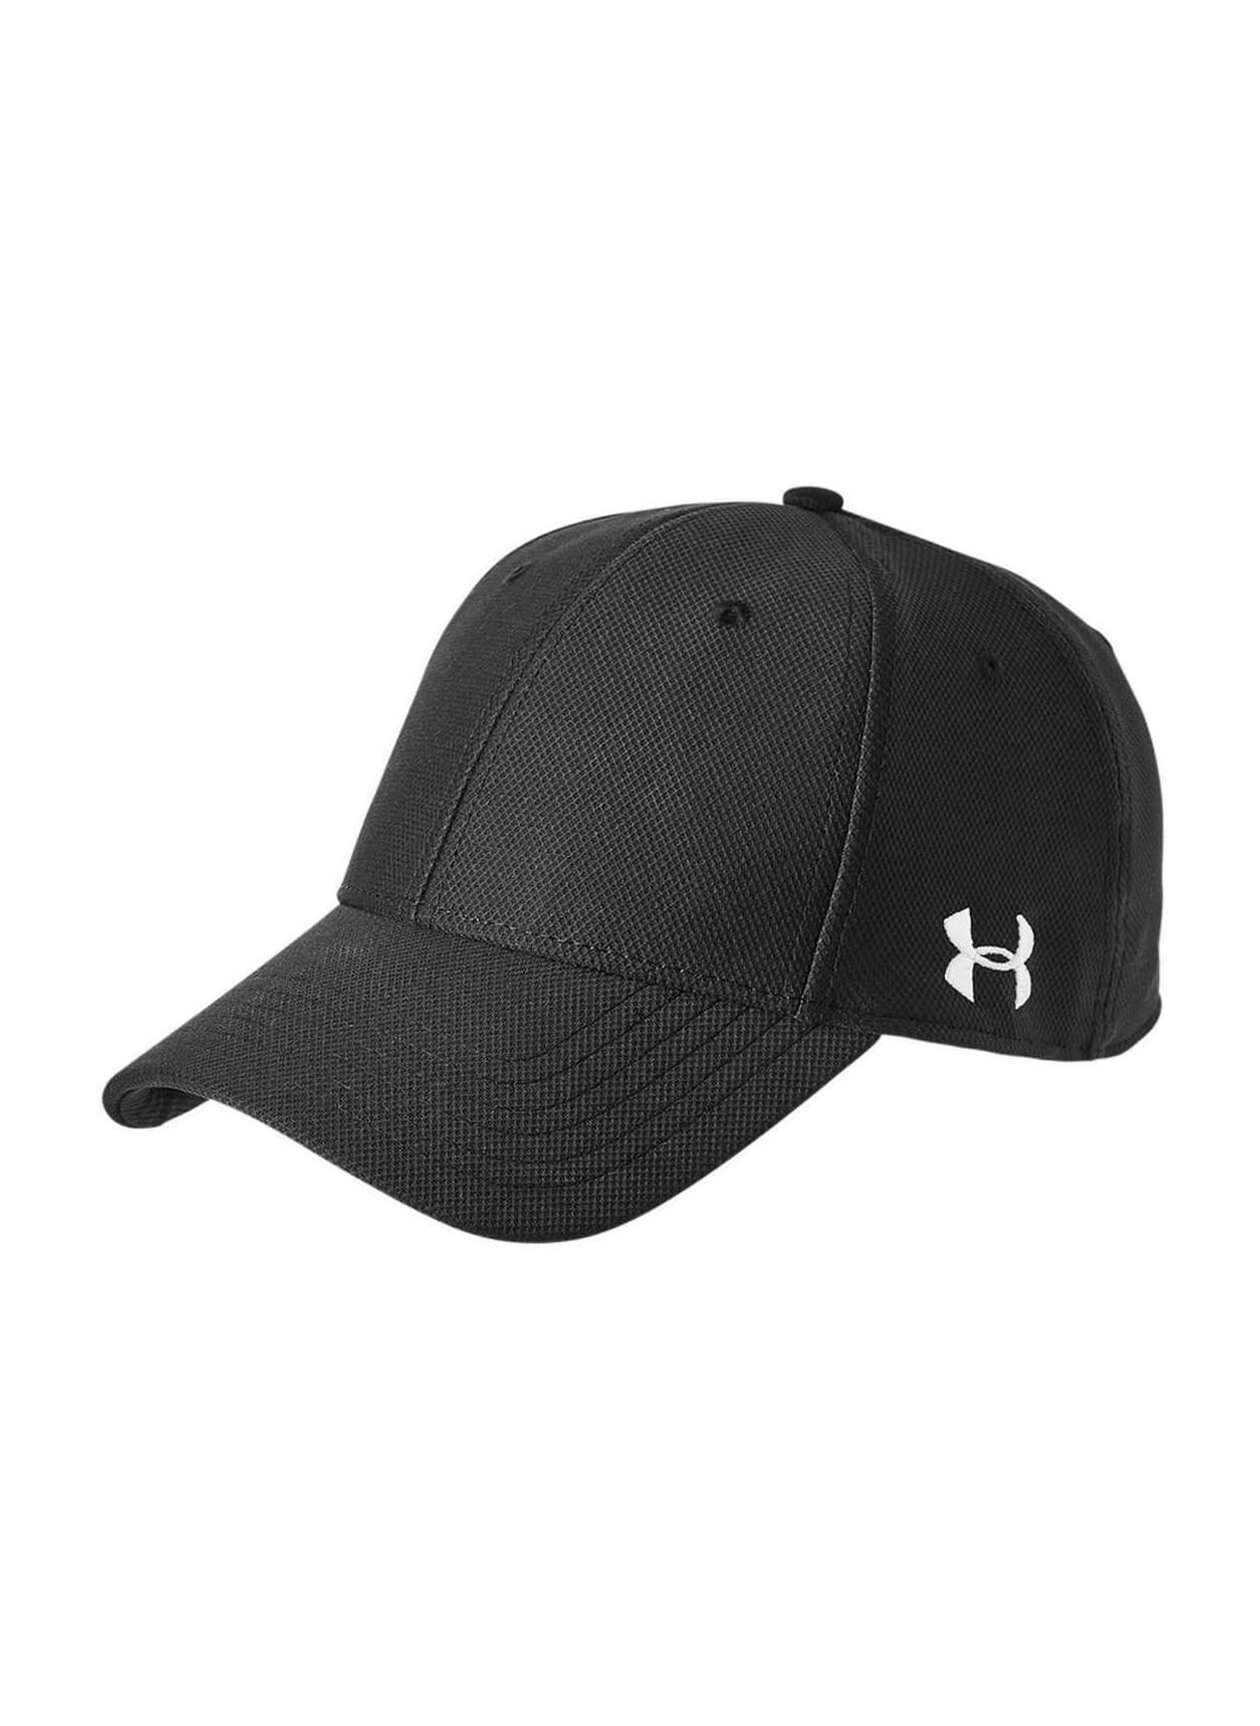 Under Armour Blitzing Curved Under Armour Hat | Custom Logo Hats